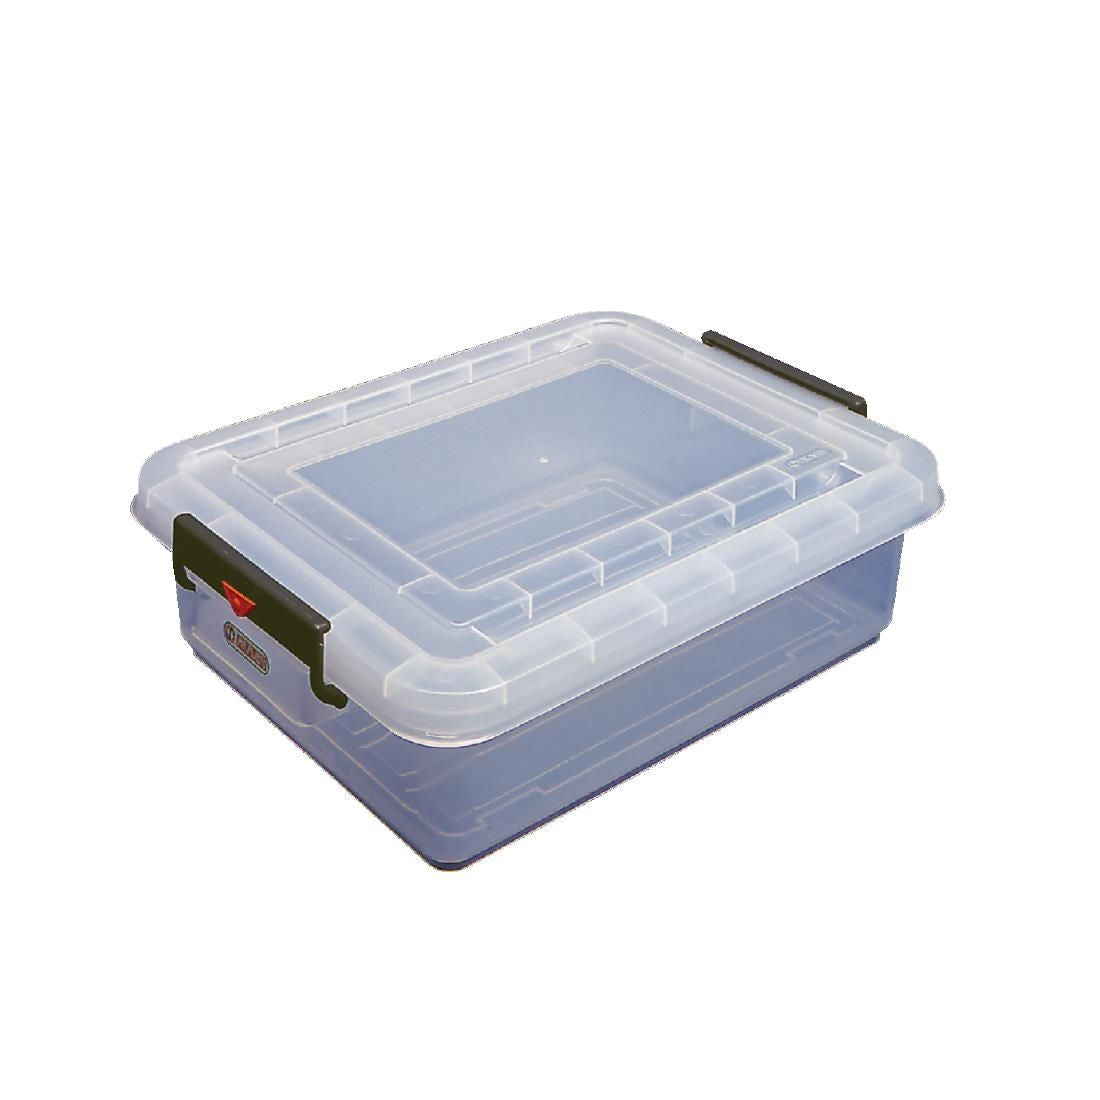 Araven Polypropylene Food Storage Container with Colour Clips 40Ltr JD Catering Equipment Solutions Ltd